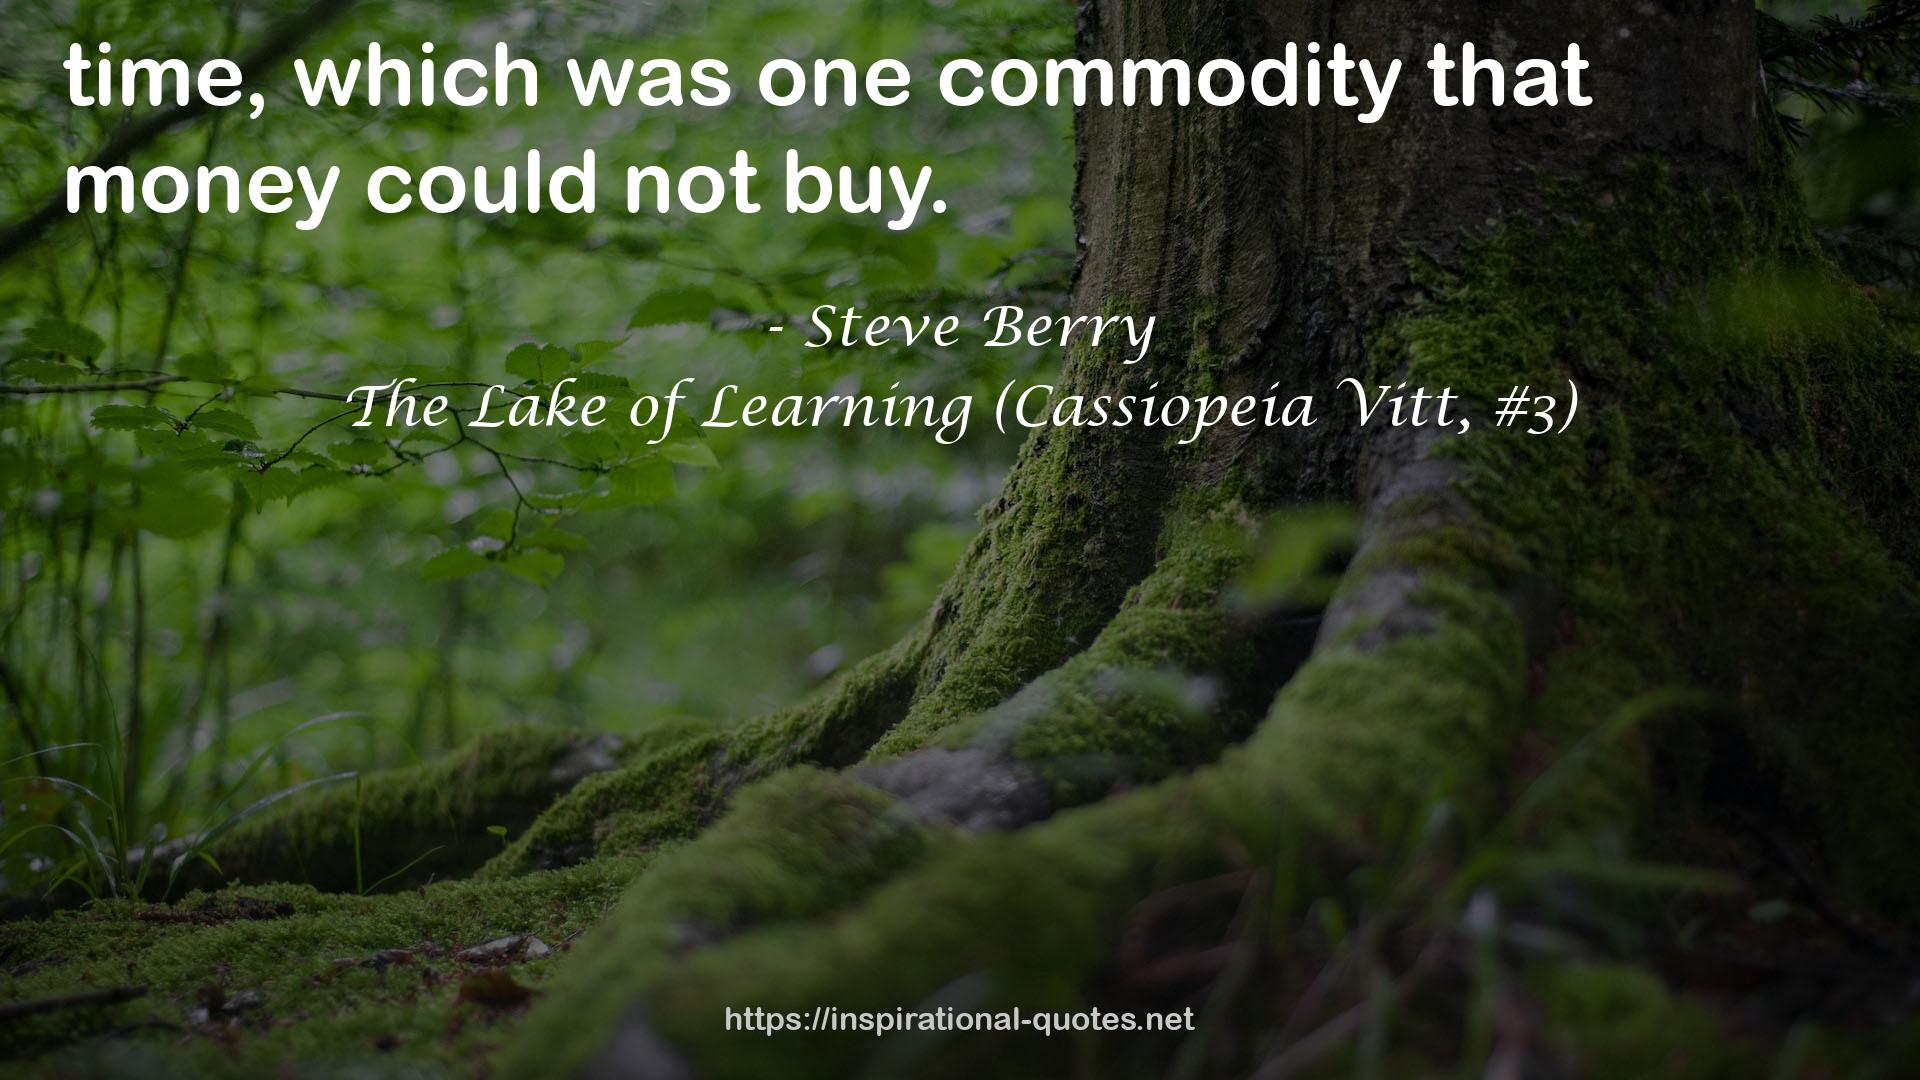 The Lake of Learning (Cassiopeia Vitt, #3) QUOTES